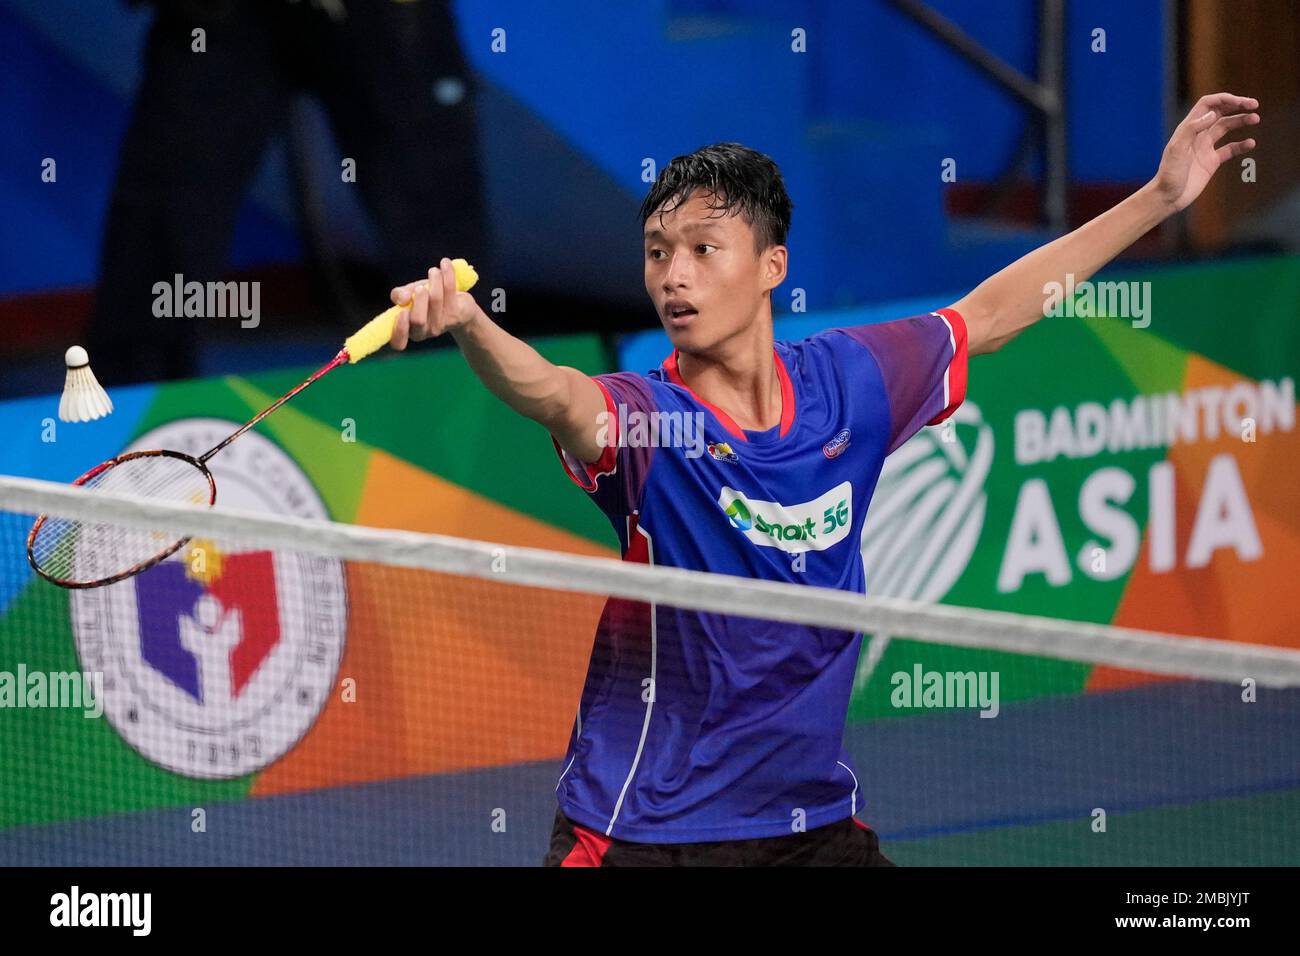 Jewel Angelo Albo from the Philippines against Lei Lan Xi from China during the qualification round of the Badminton Asia Championships in Muntinlupa, Philippines on Tuesday, April 26, 2022